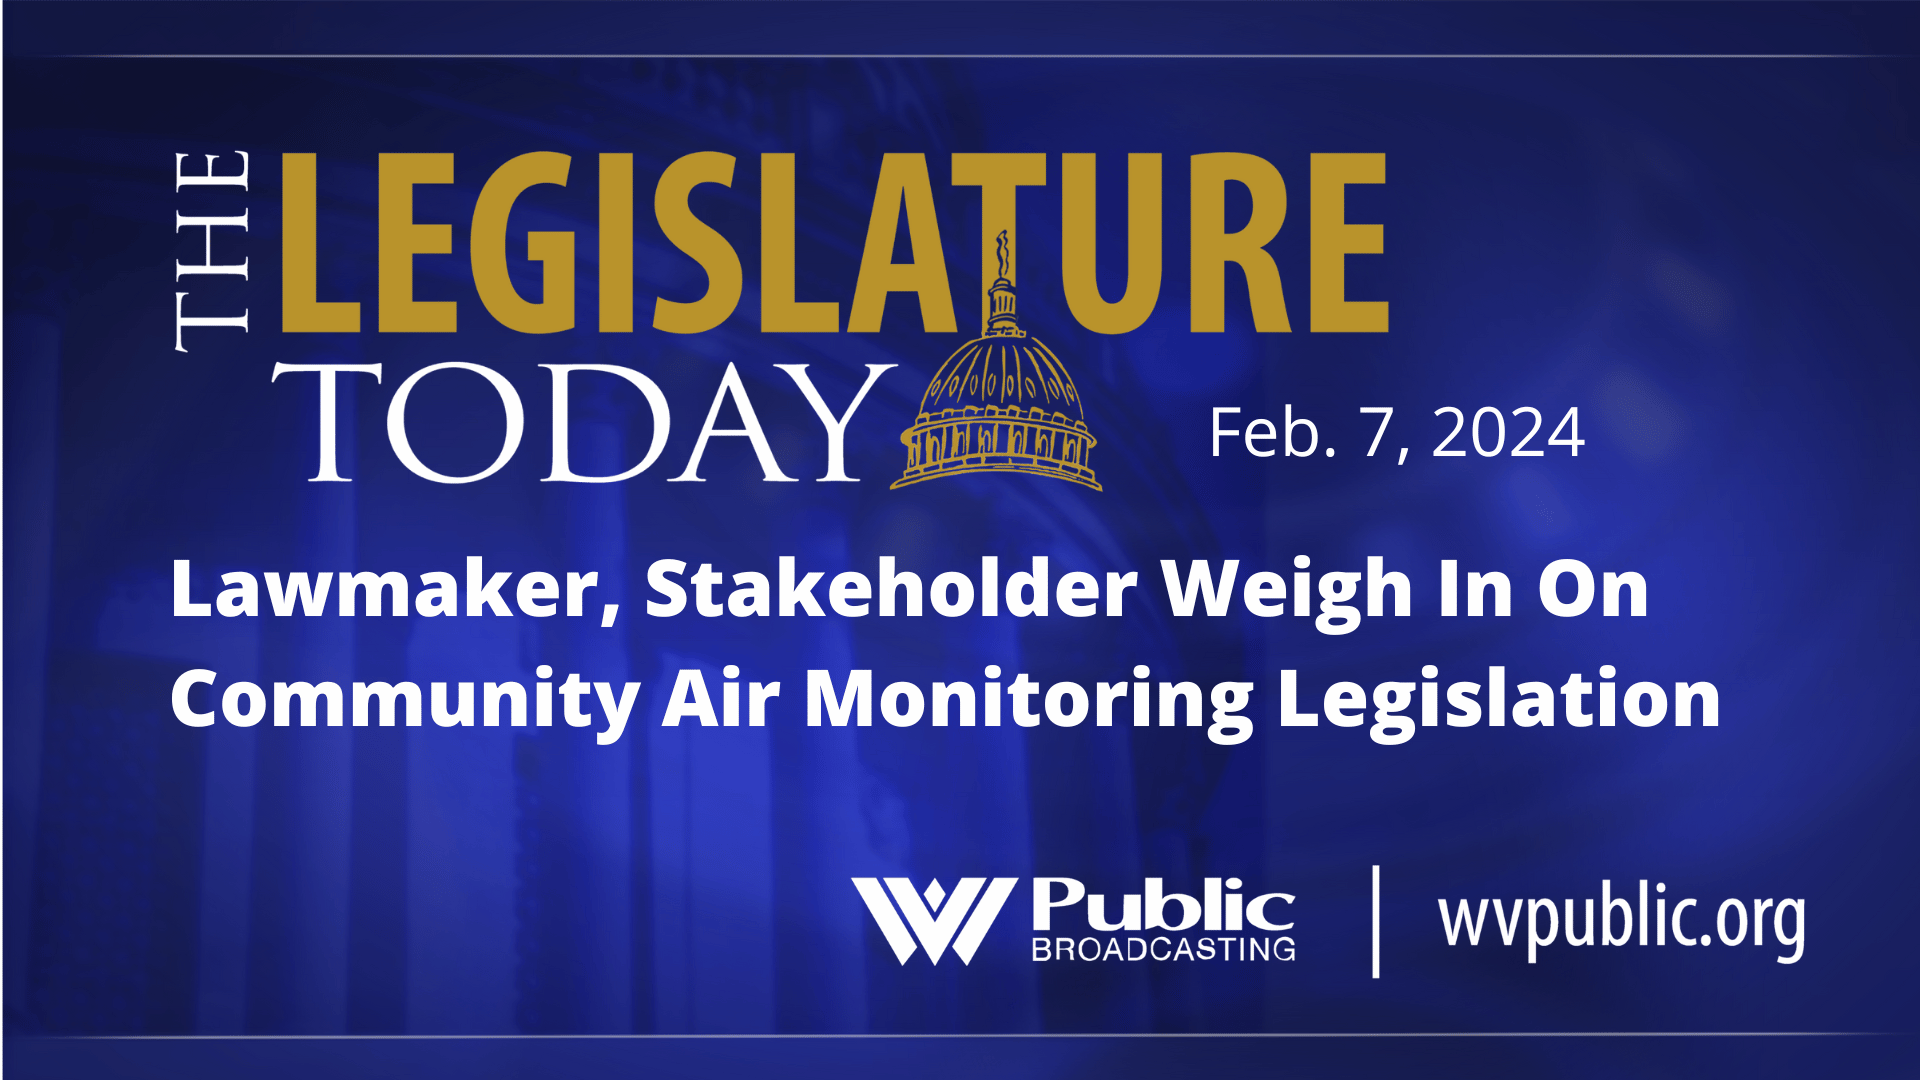 Lawmaker, Stakeholder Weigh In On Community Air Monitoring Legislation